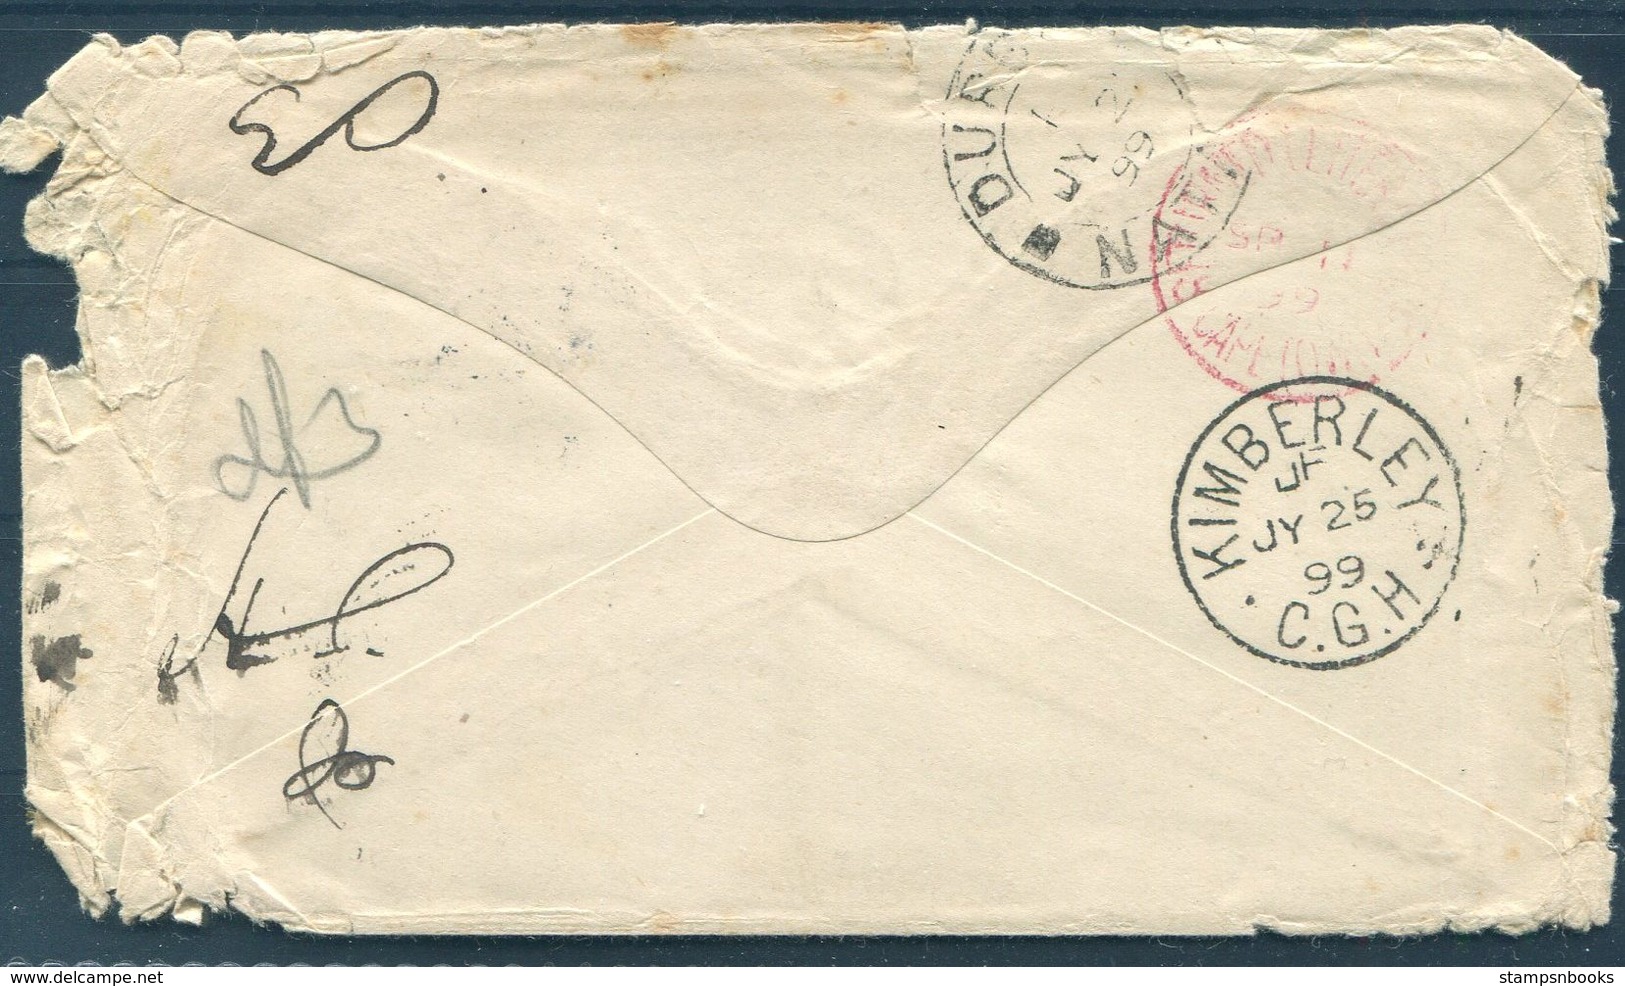 1899 Tasmania Hobart Cover Eclipse Restaurant, Kimberley South Africa Redirected Durban "GONE - NO ADDRESS" Cachet - Covers & Documents